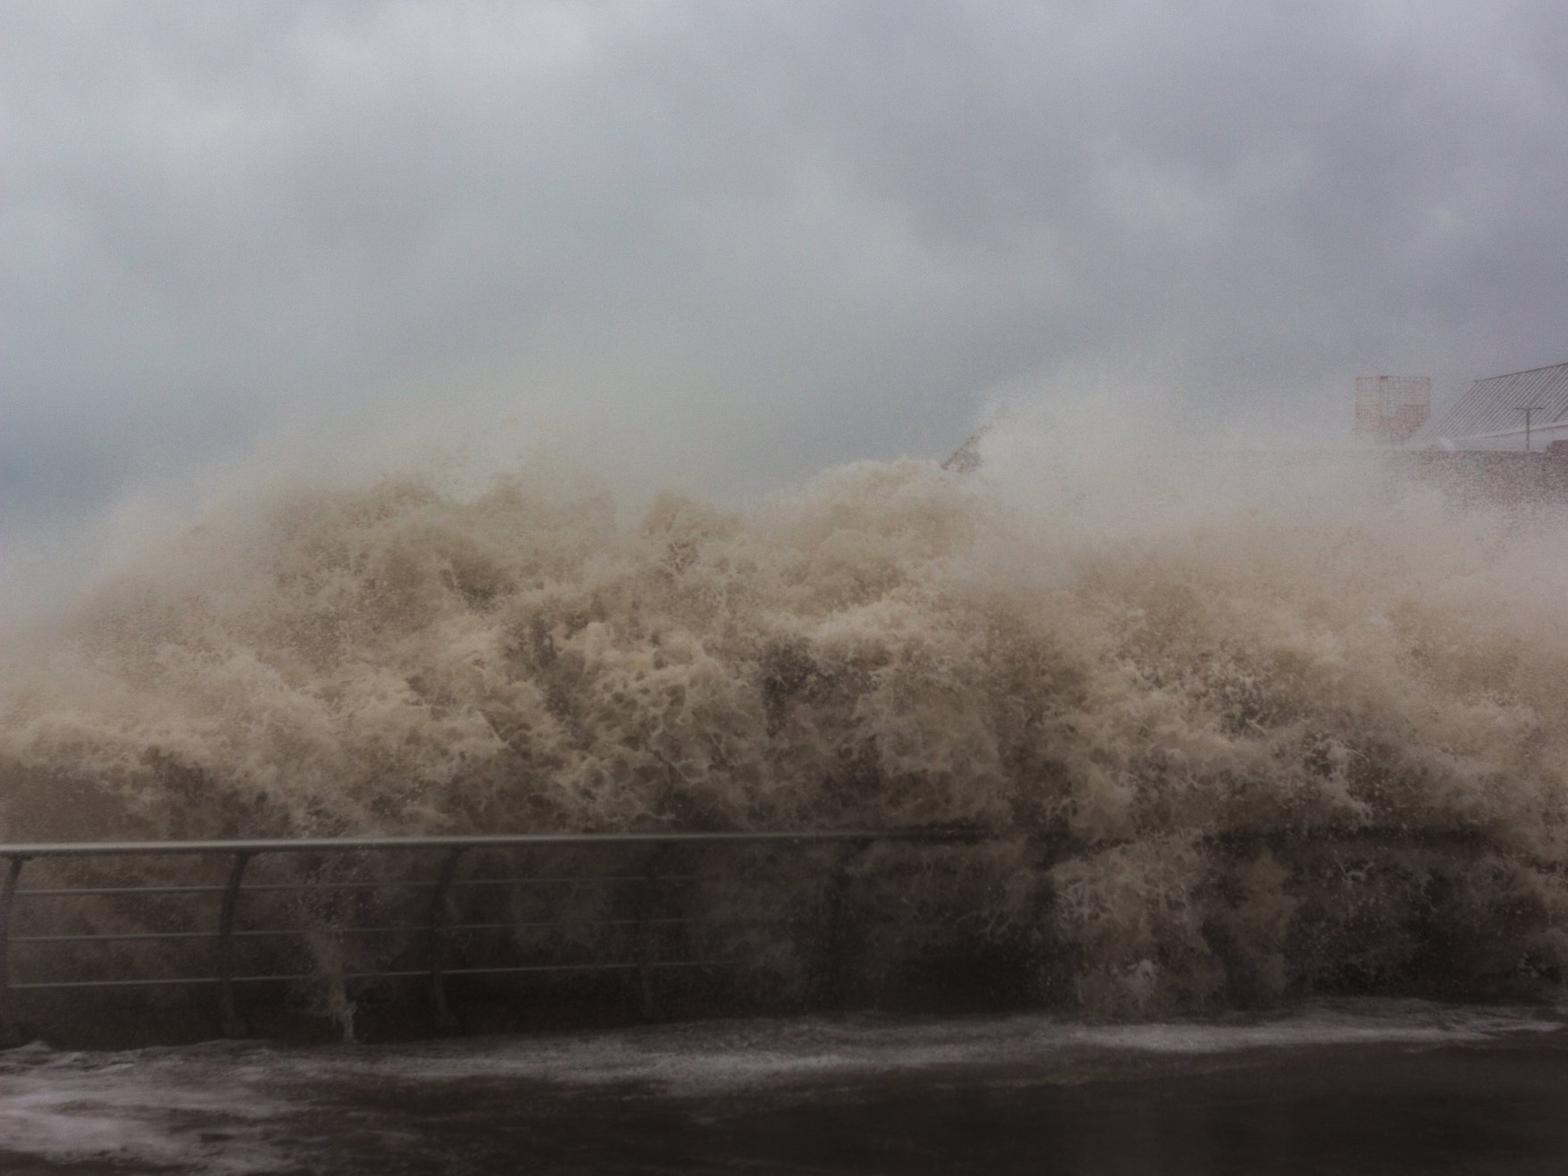 Waves crashing over the barriers along Blackpool seafront. Picture by Joseph Seager.